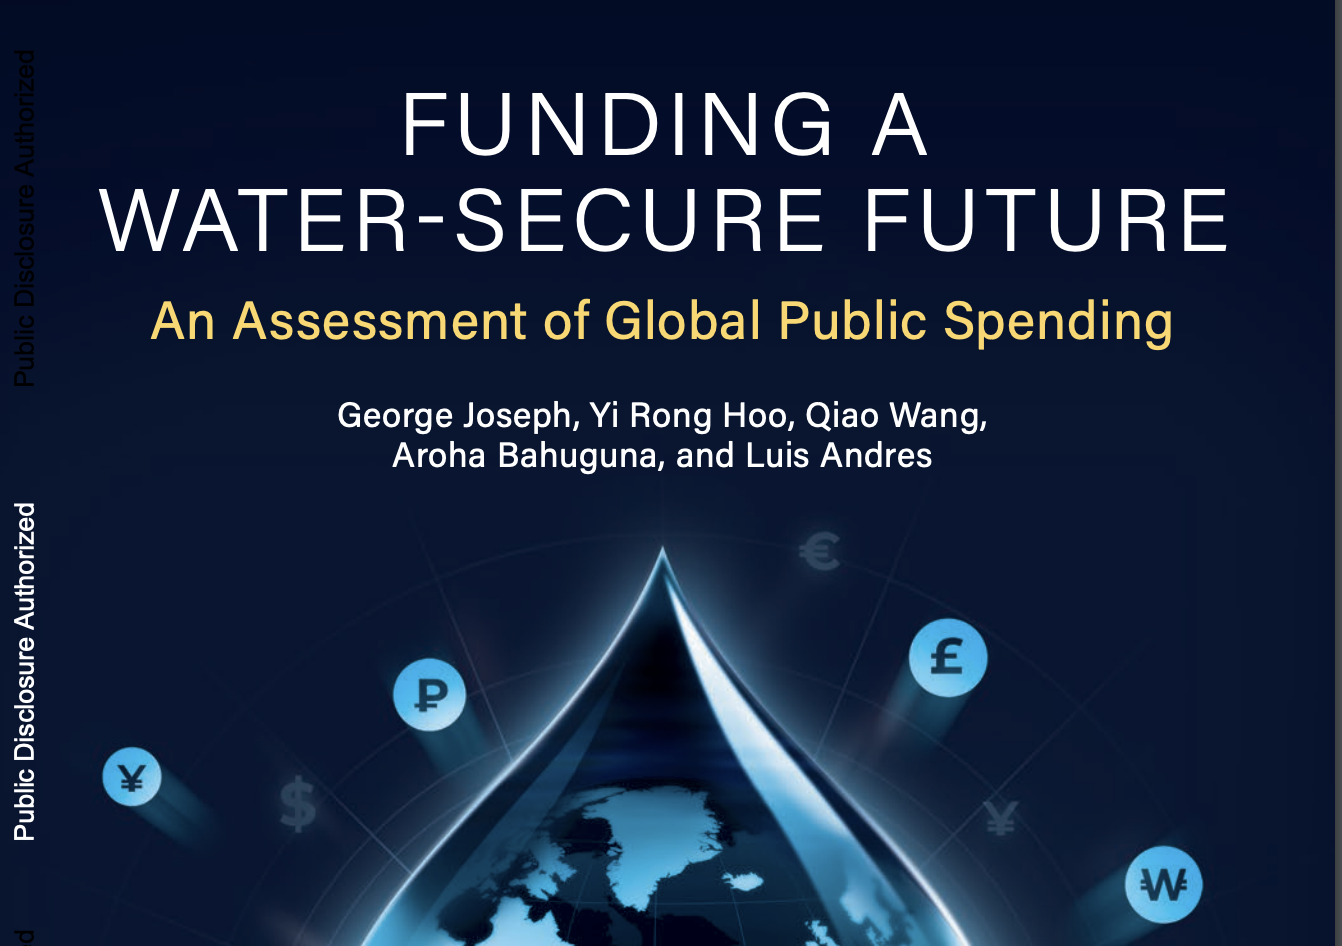 New World Bank report analyses global public spending in water